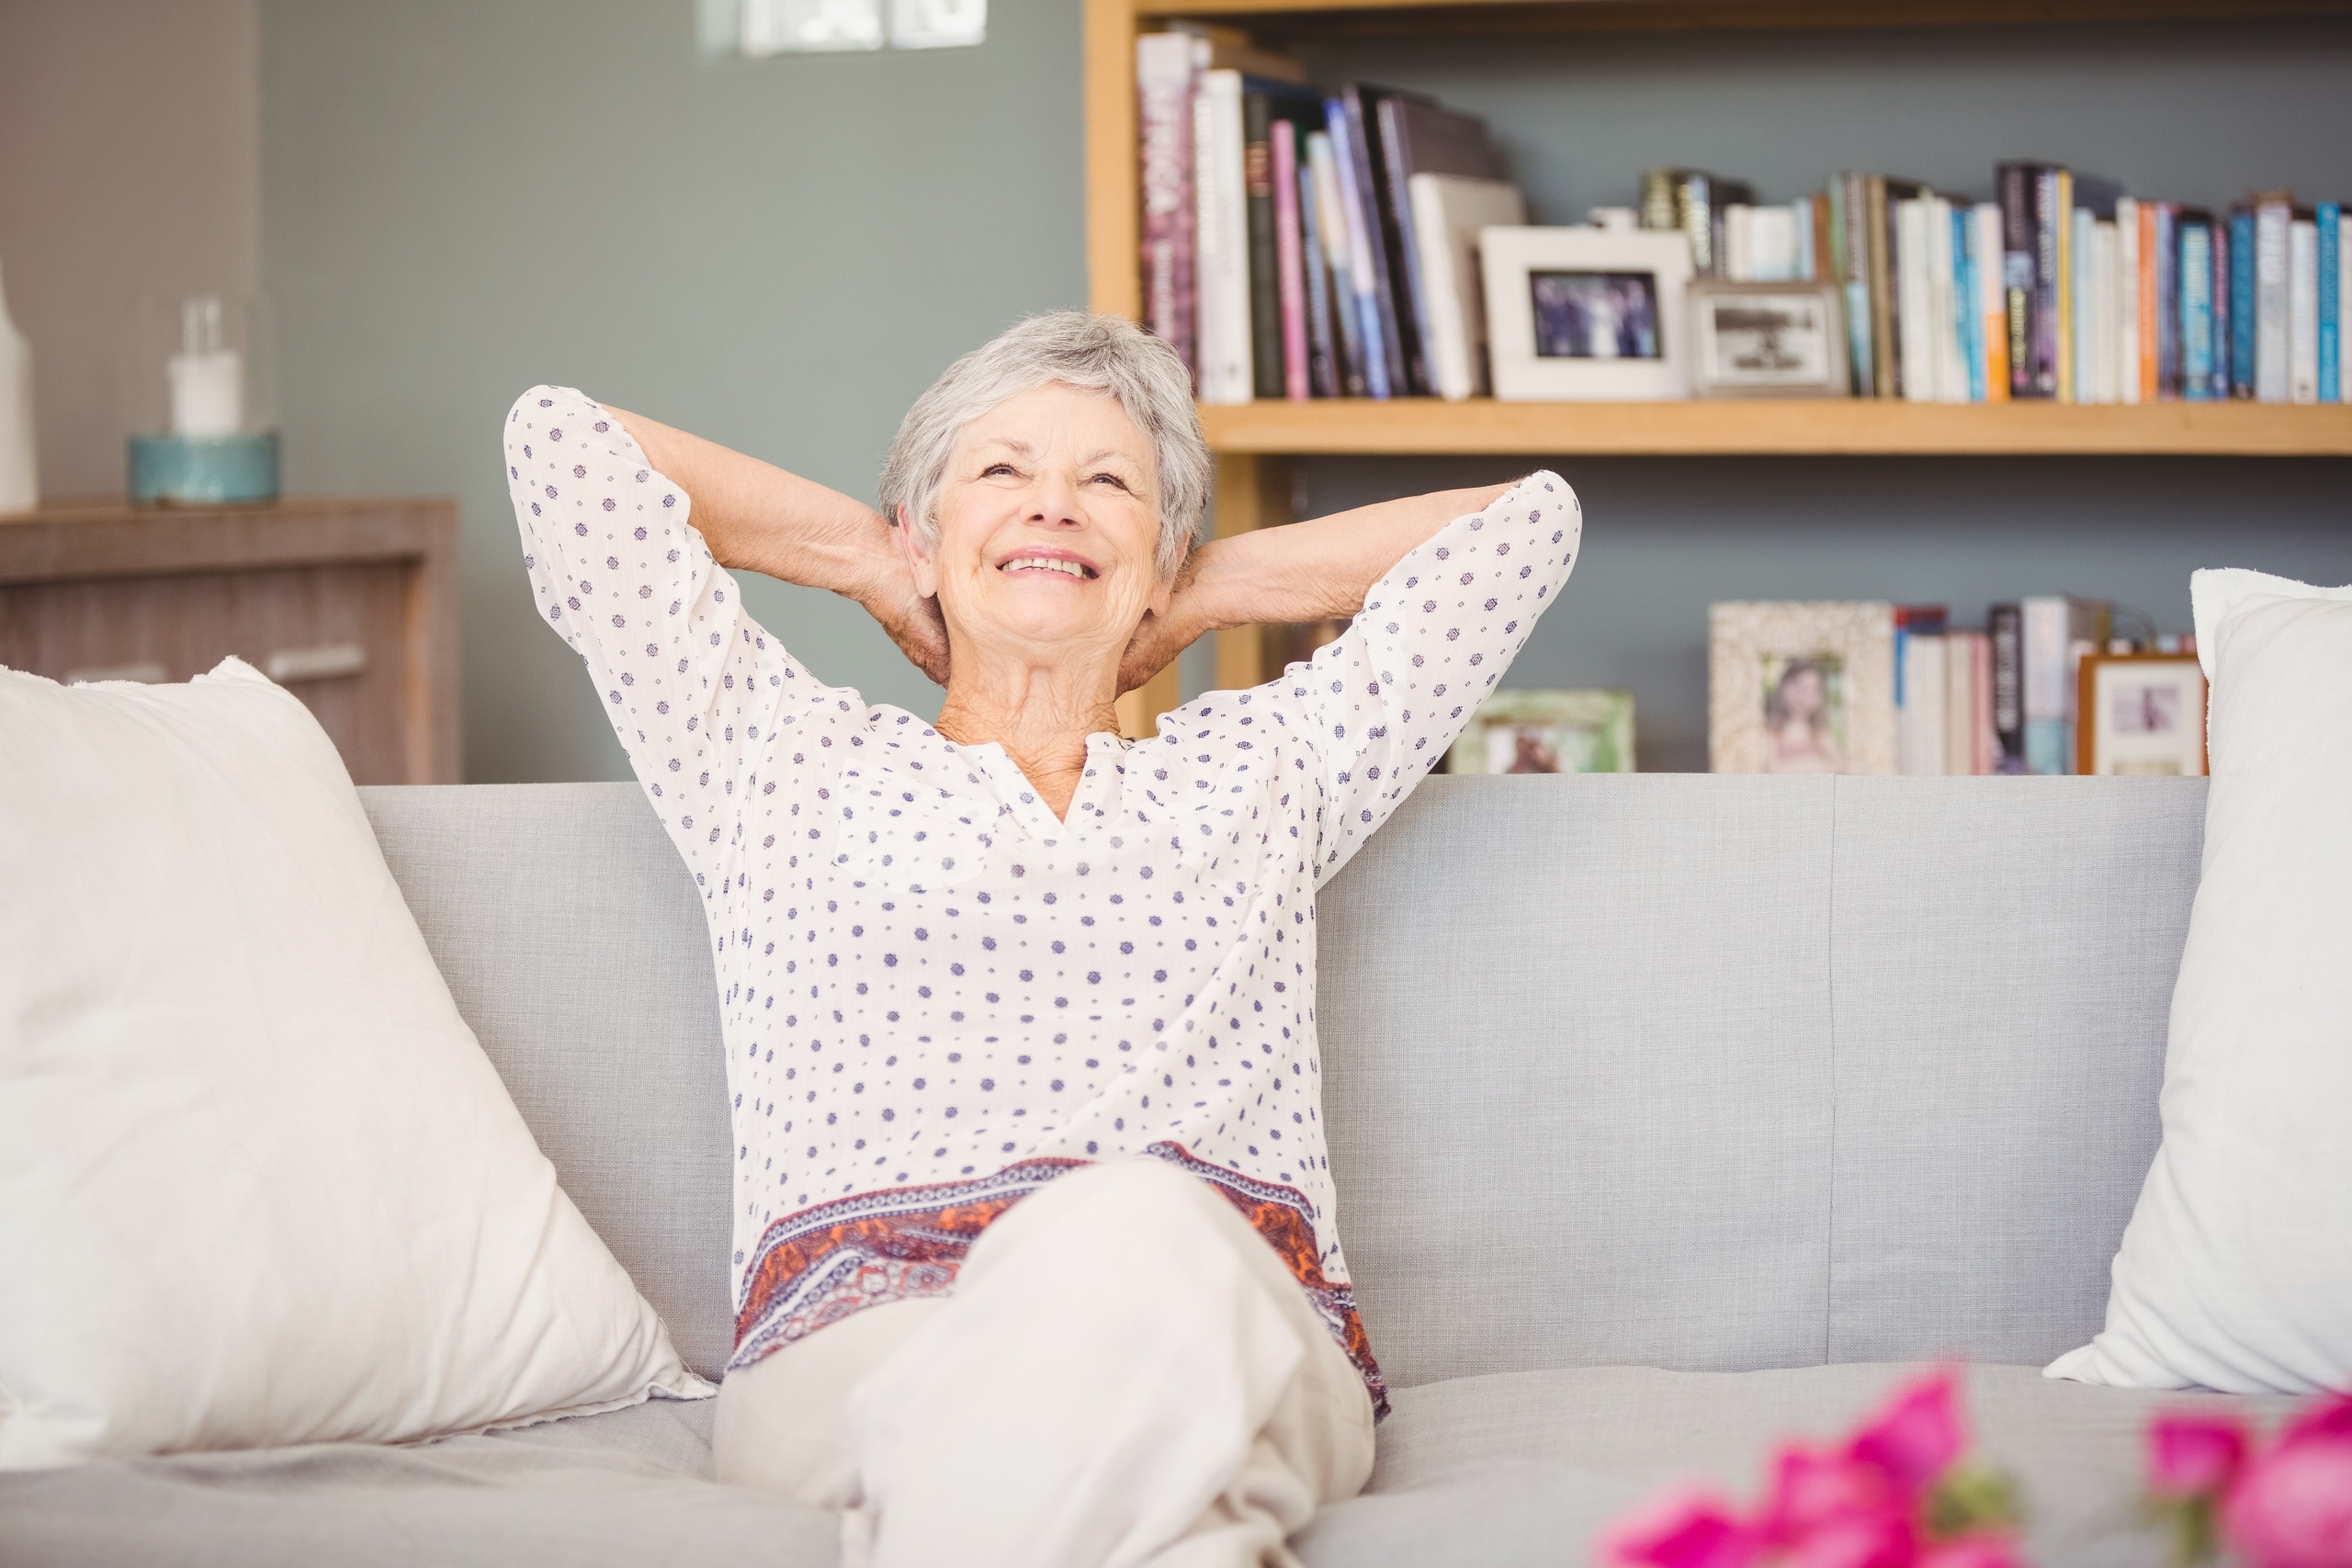 Senior woman relaxes in a clean home after spring cleaning.